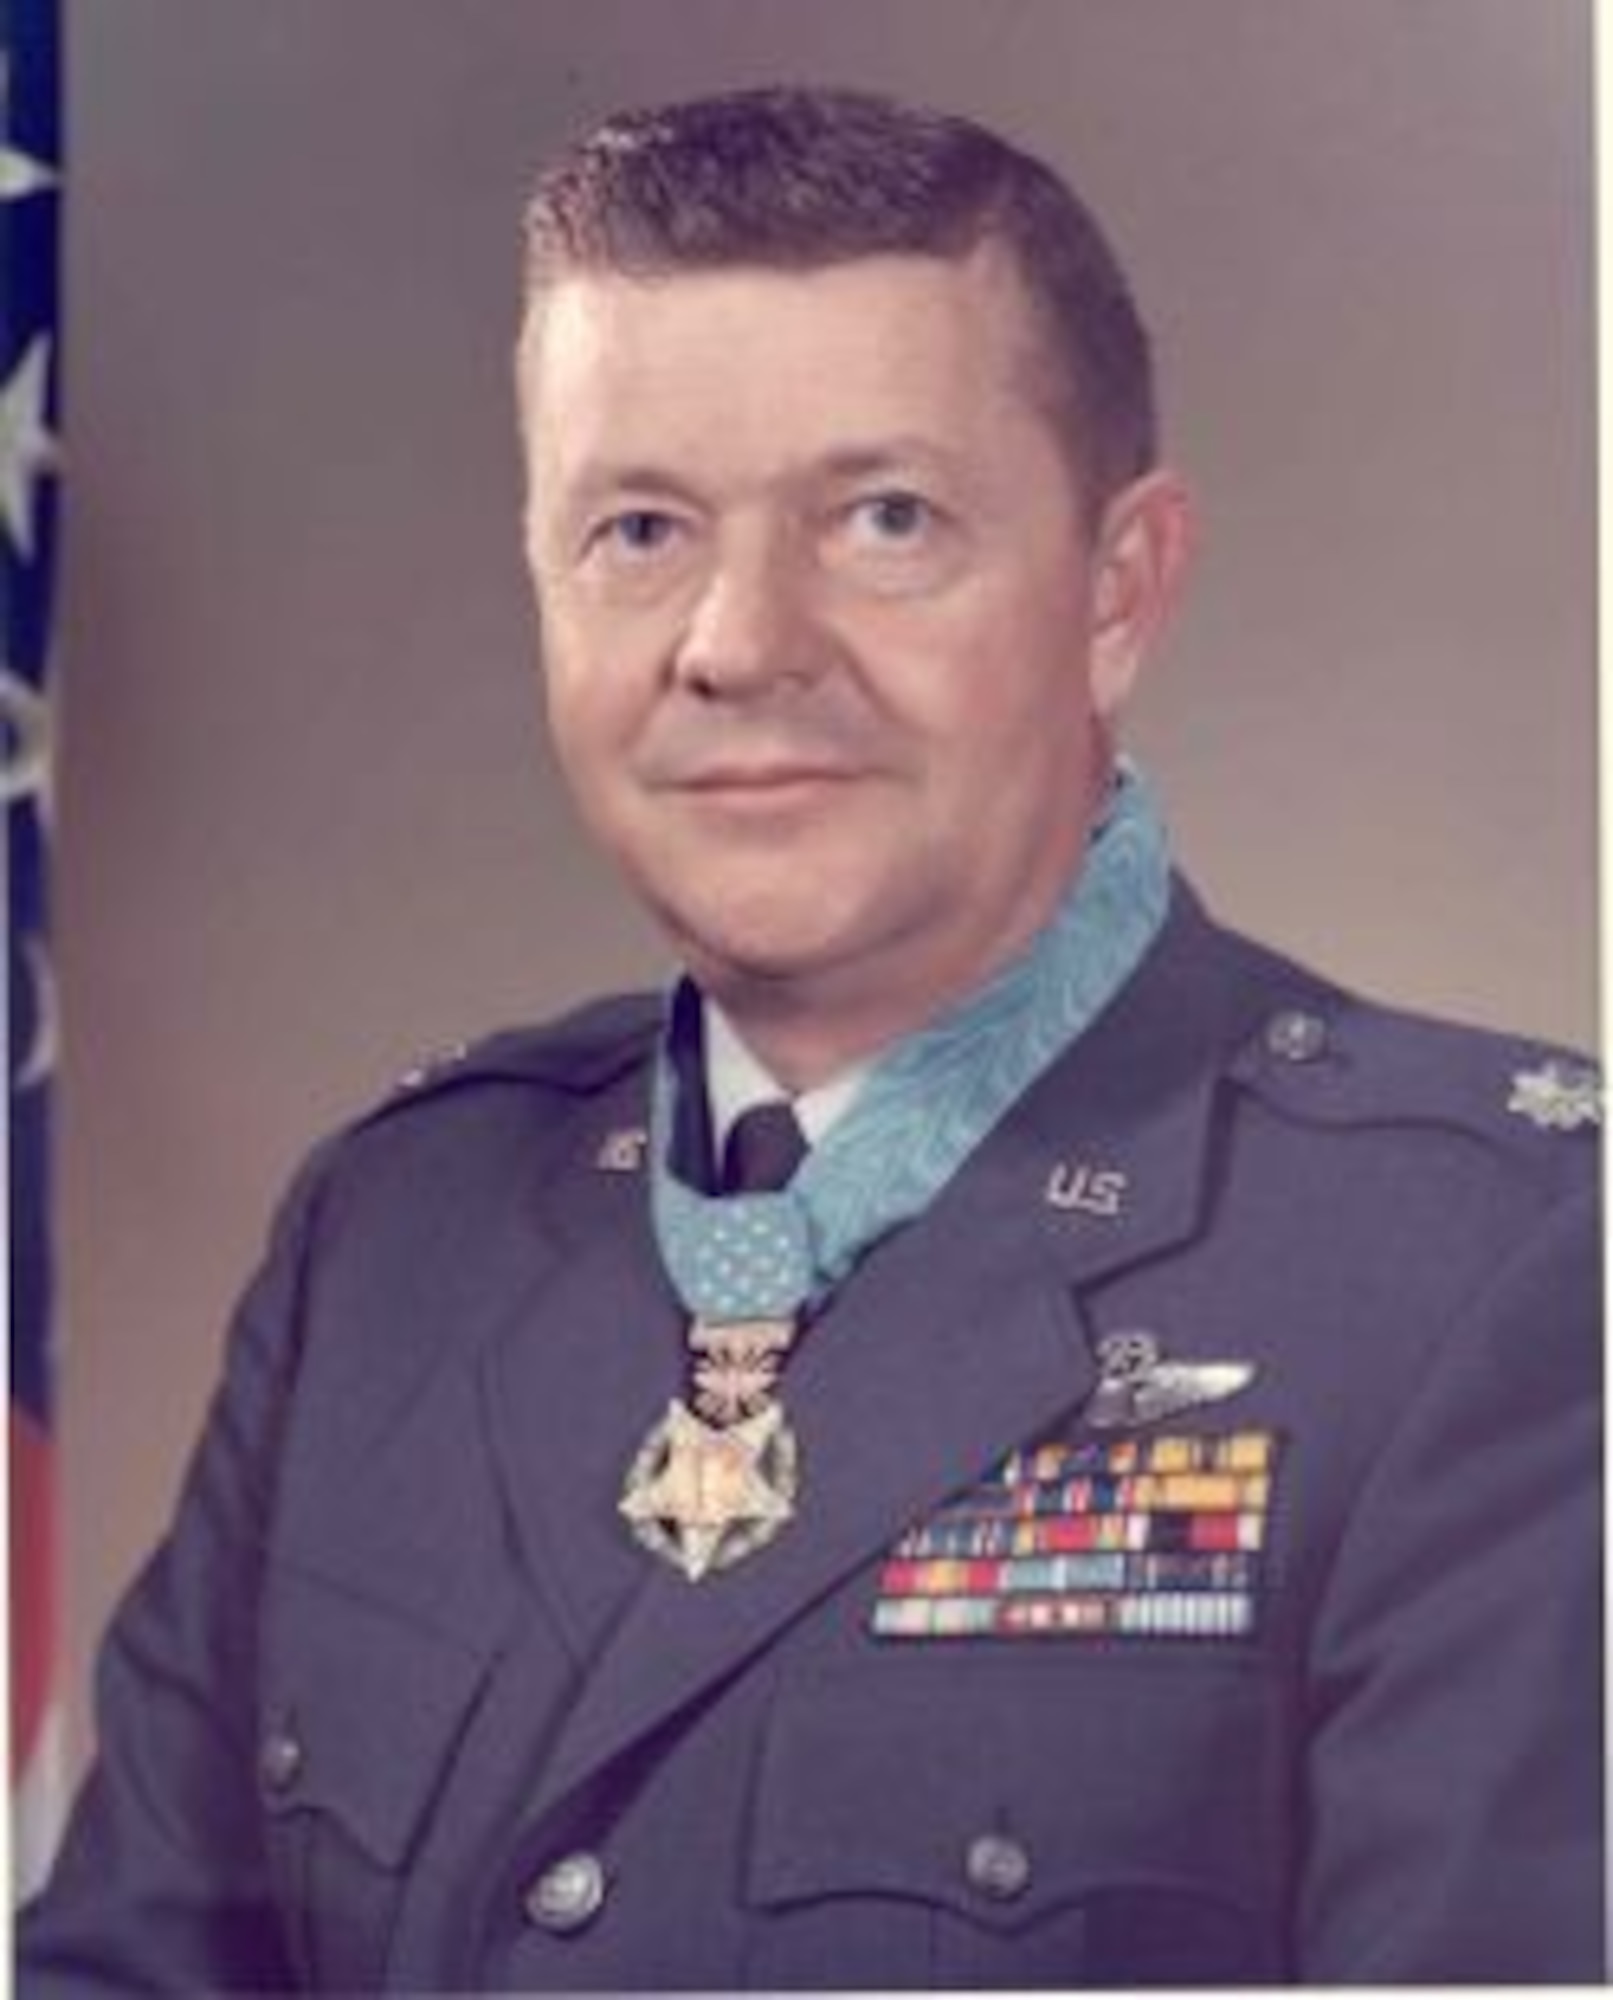 In 1968, Lt. Col. Joe M. Jackson landed his C-123 Provider aircraft at a special forces camp in Vietnam that was being overrun by the enemy. Despite intense hostile fire, Jackson rescued a three-man combat control team and earned the Medal of Honor. (Courtesy Photo)